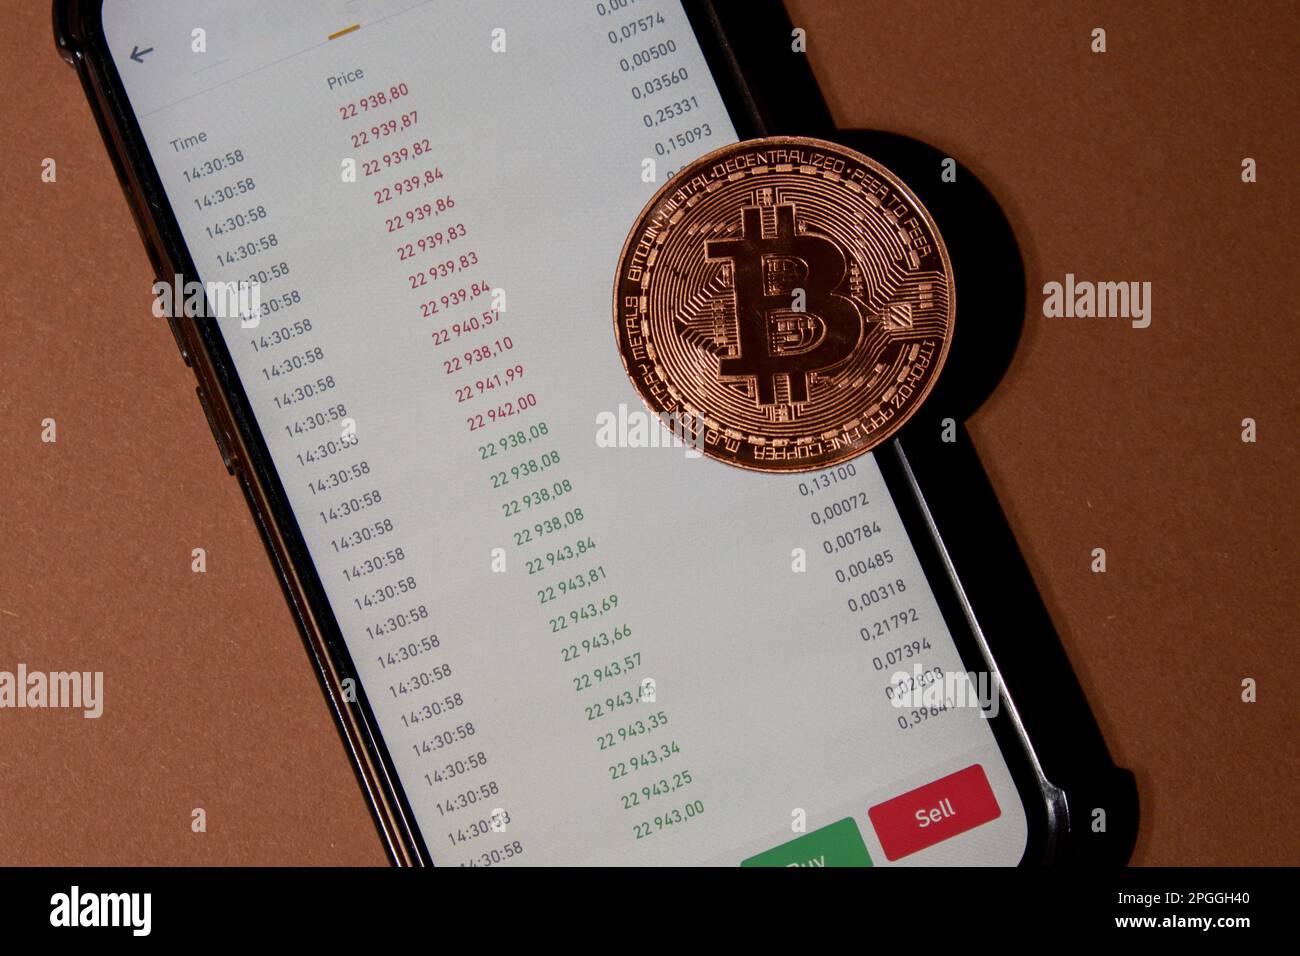 Bitcoin gold coin on background of Stock Market Chart. Bitcoin mining trading concept. BTC golden money. Worldwide virtual internet Cryptocurrency or crypto digital payment system. Digital coin money farm in digital cyberspace Stock Photo